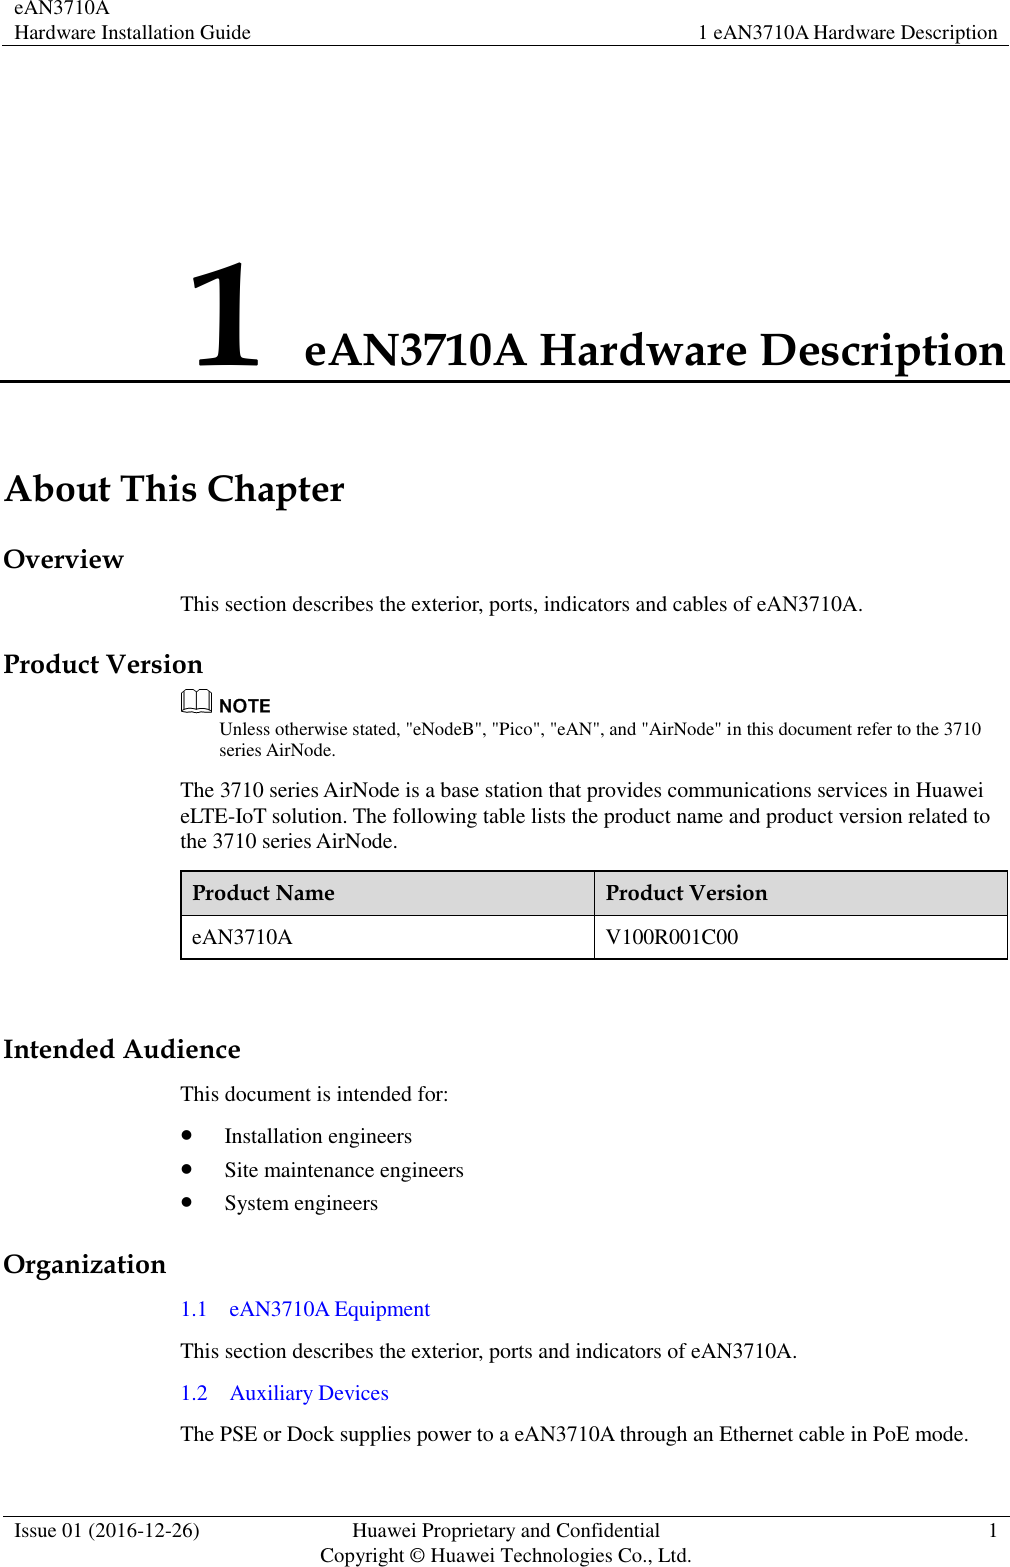 eAN3710A Hardware Installation Guide 1 eAN3710A Hardware Description  Issue 01 (2016-12-26) Huawei Proprietary and Confidential                                     Copyright © Huawei Technologies Co., Ltd. 1  1 eAN3710A Hardware Description About This Chapter Overview This section describes the exterior, ports, indicators and cables of eAN3710A. Product Version  Unless otherwise stated, &quot;eNodeB&quot;, &quot;Pico&quot;, &quot;eAN&quot;, and &quot;AirNode&quot; in this document refer to the 3710 series AirNode.   The 3710 series AirNode is a base station that provides communications services in Huawei eLTE-IoT solution. The following table lists the product name and product version related to the 3710 series AirNode. Product Name Product Version eAN3710A V100R001C00  Intended Audience This document is intended for:    Installation engineers  Site maintenance engineers  System engineers Organization 1.1    eAN3710A Equipment This section describes the exterior, ports and indicators of eAN3710A. 1.2    Auxiliary Devices The PSE or Dock supplies power to a eAN3710A through an Ethernet cable in PoE mode. 